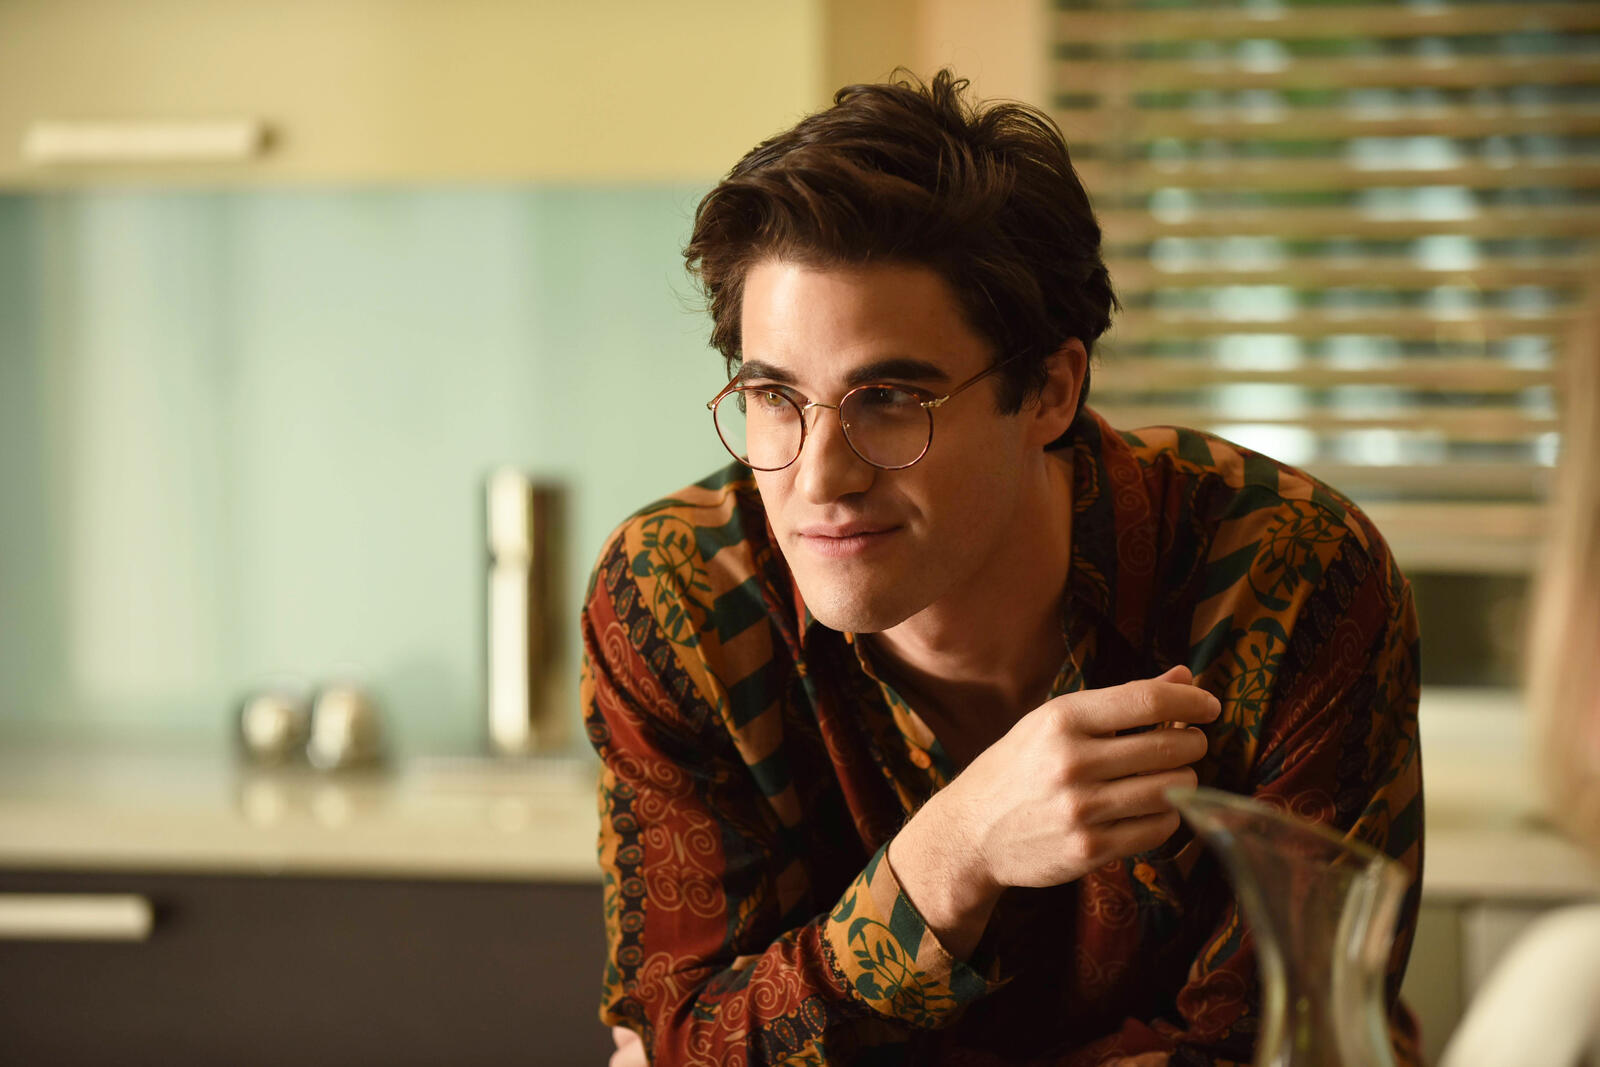 Wallpapers the assassination of gianni versace TV shows darren criss on the desktop